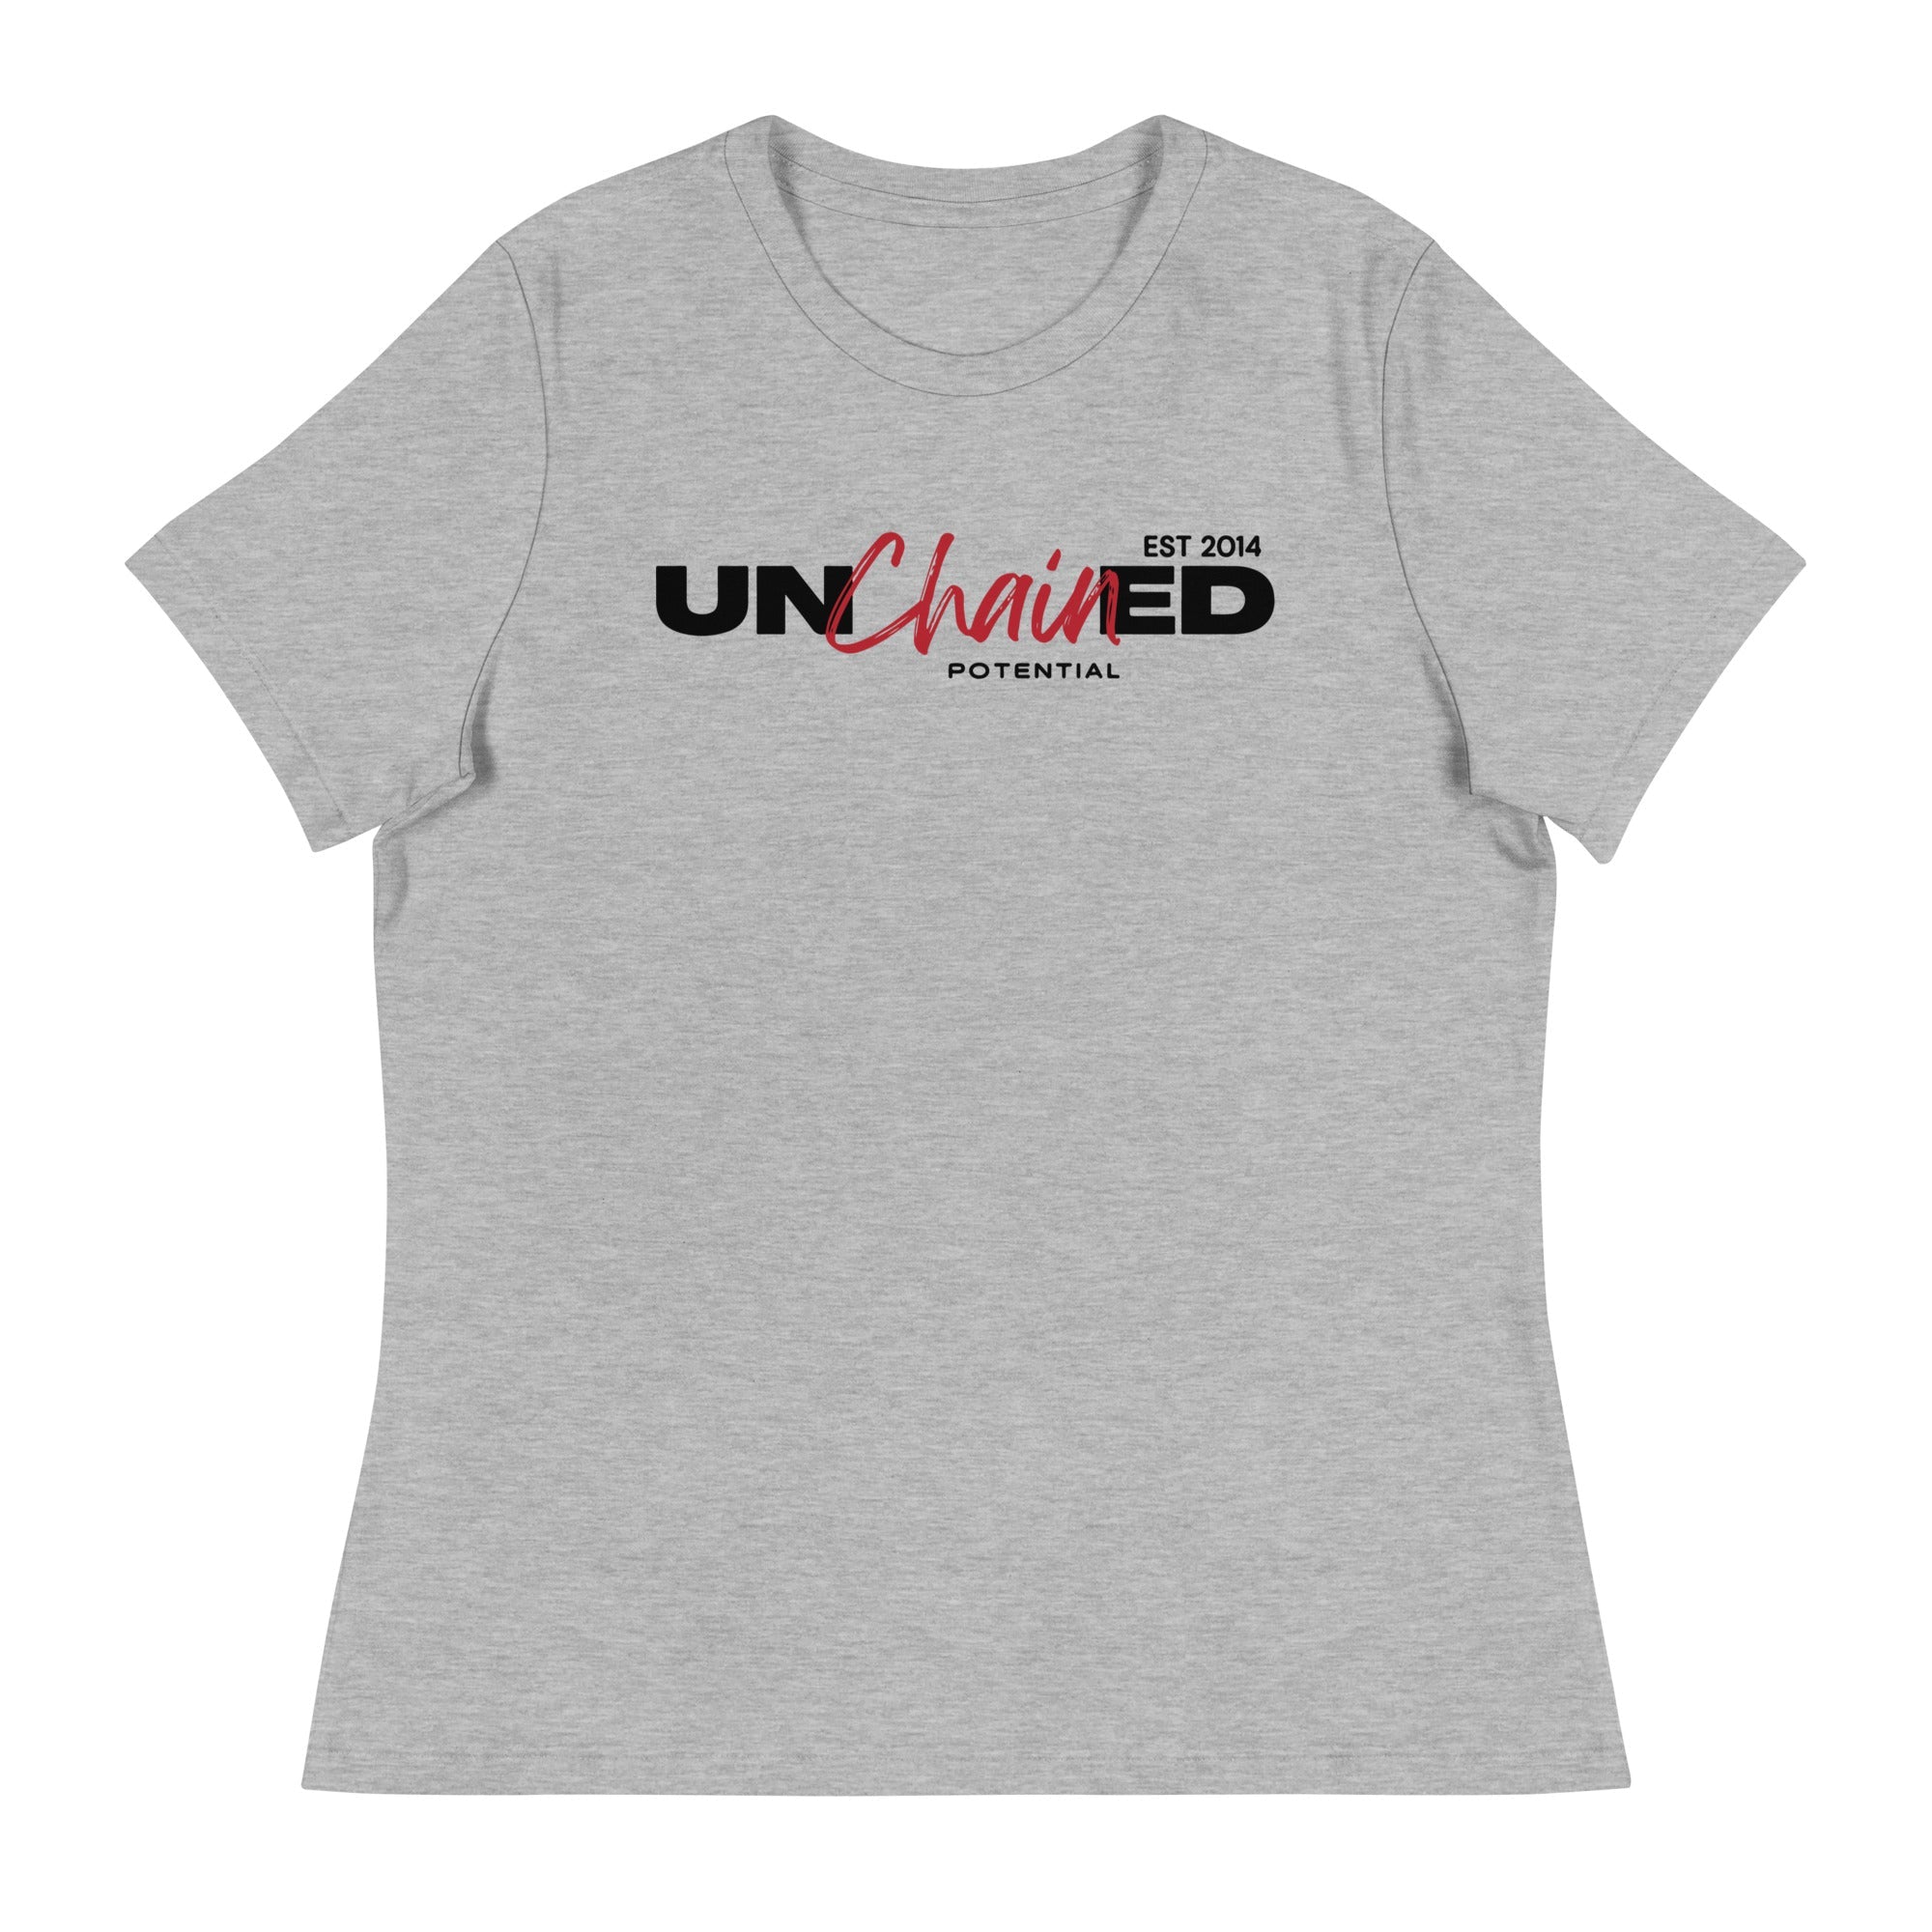 Unchained Potential Women's Relaxed T-Shirt v2